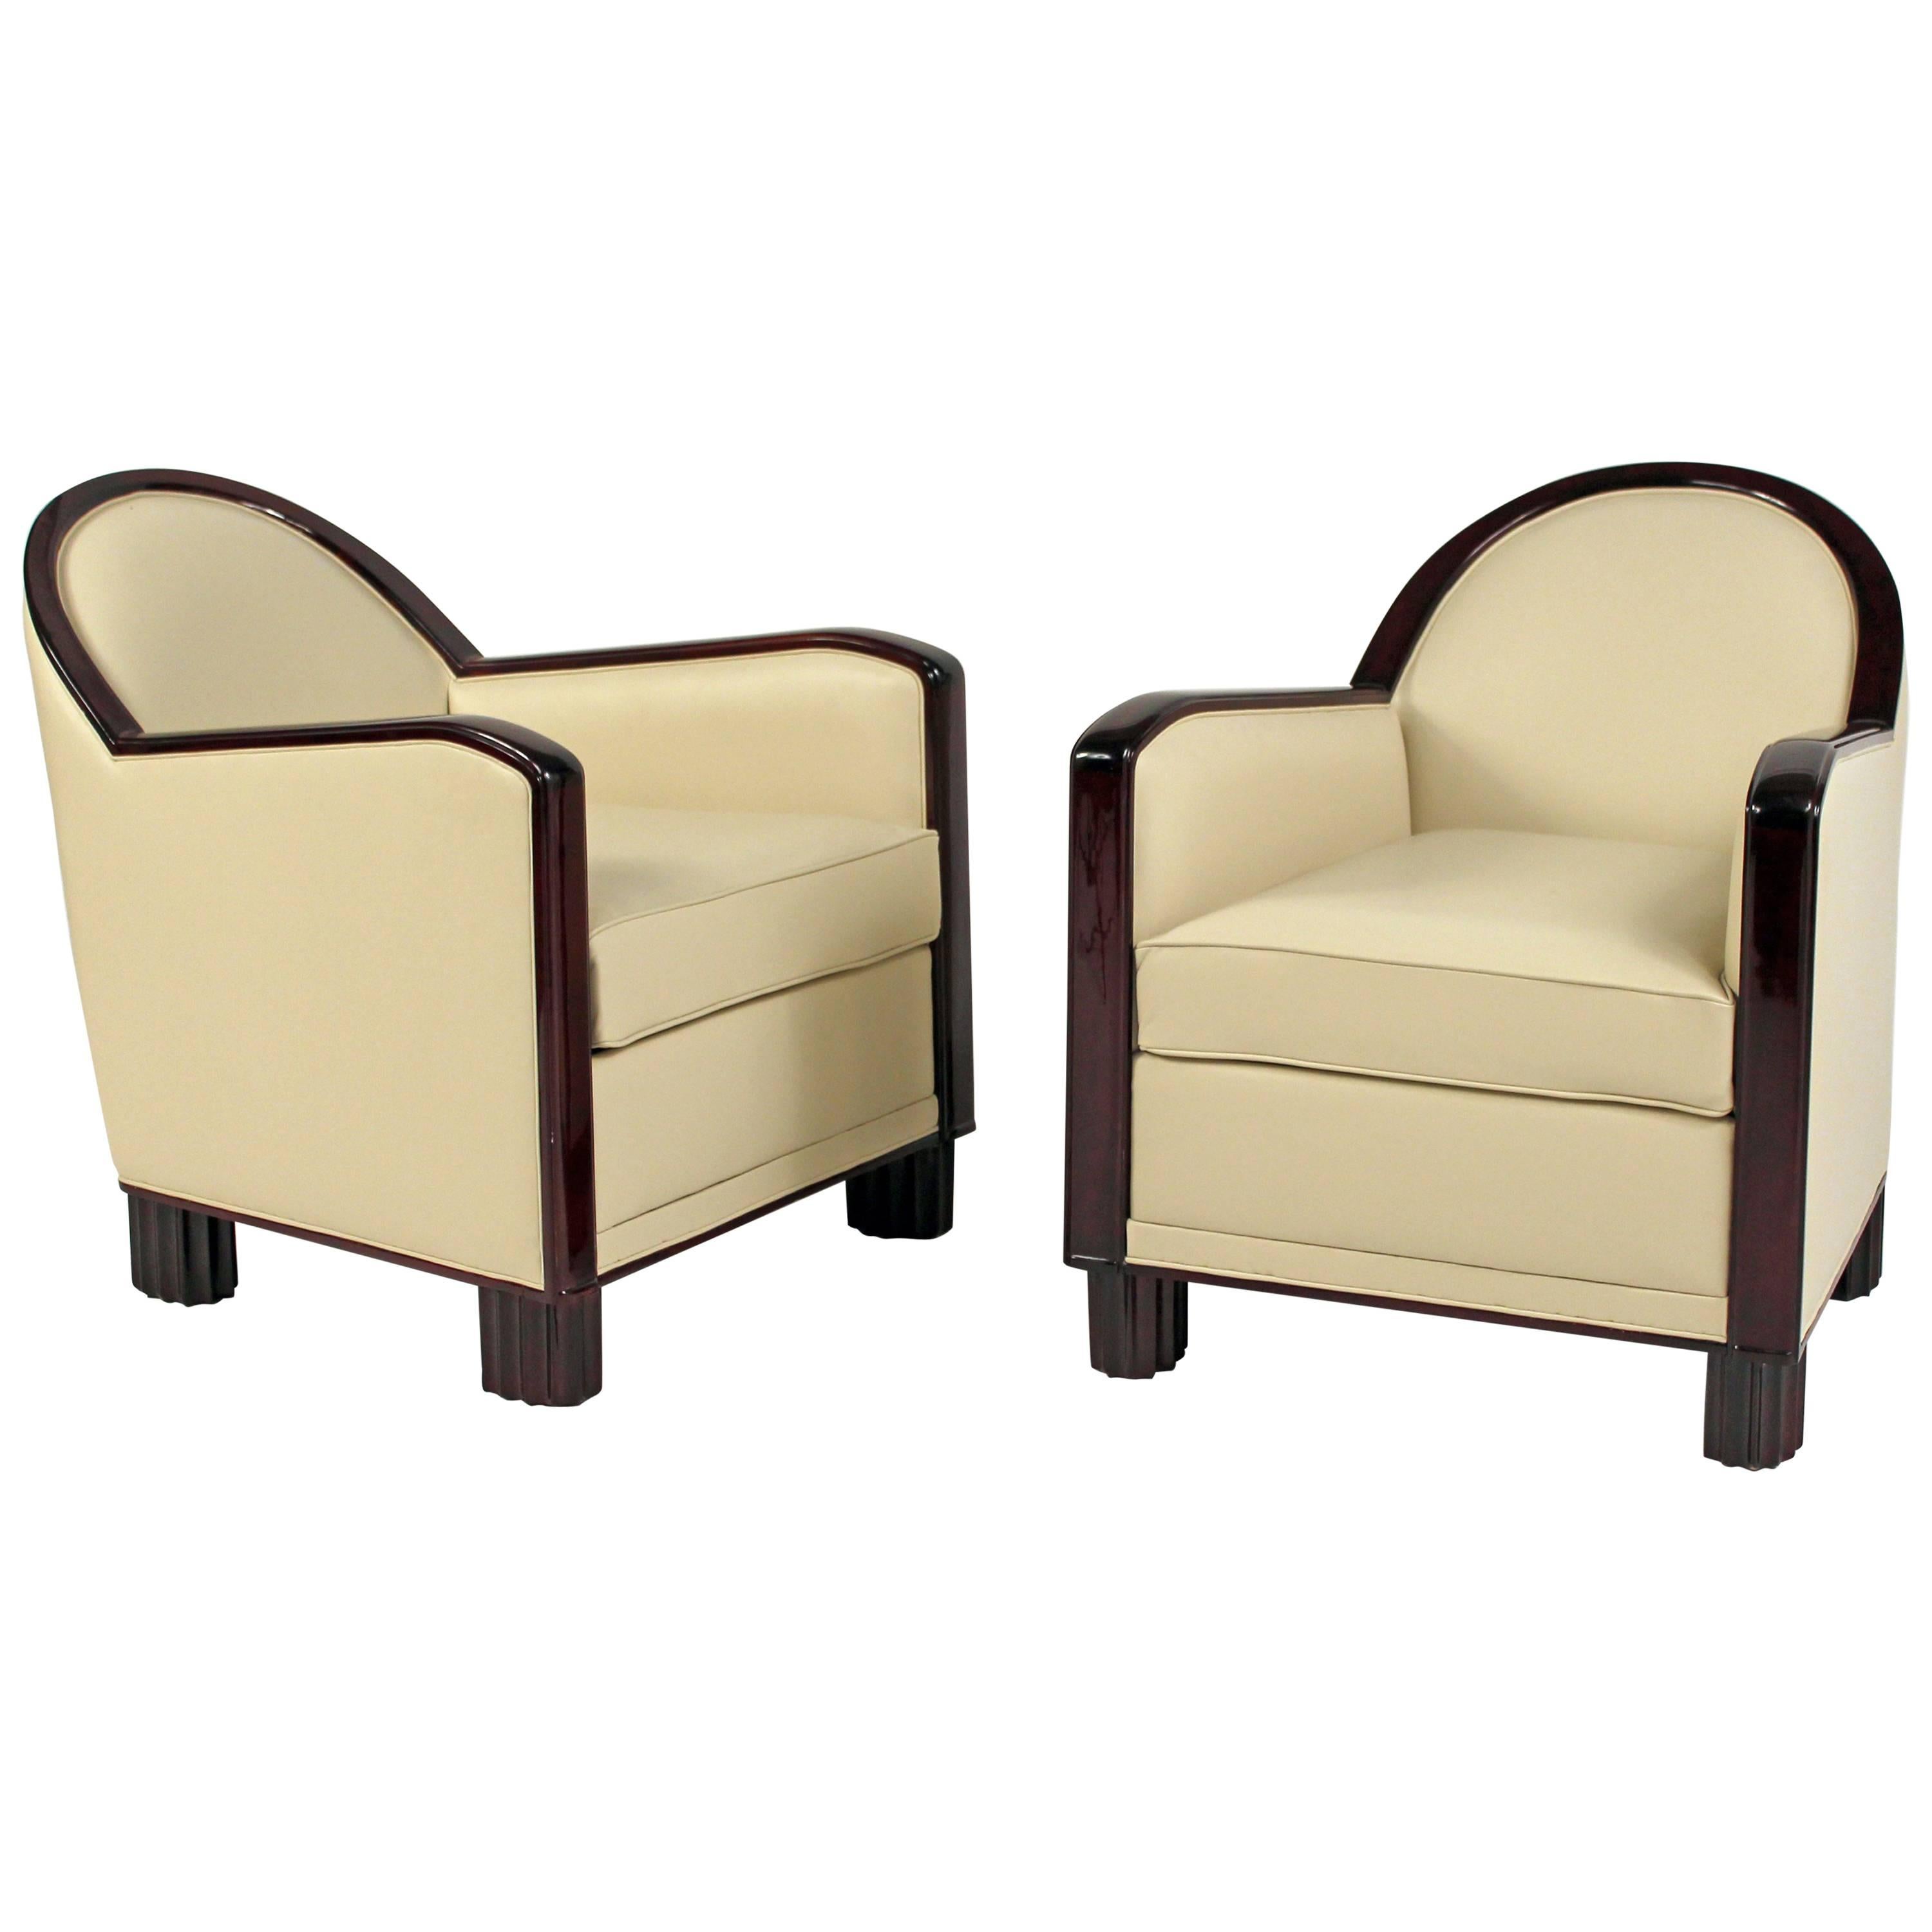 Pair of Art Deco Club Chairs by D.I.M 'Decoration Intérieure Moderne' For Sale